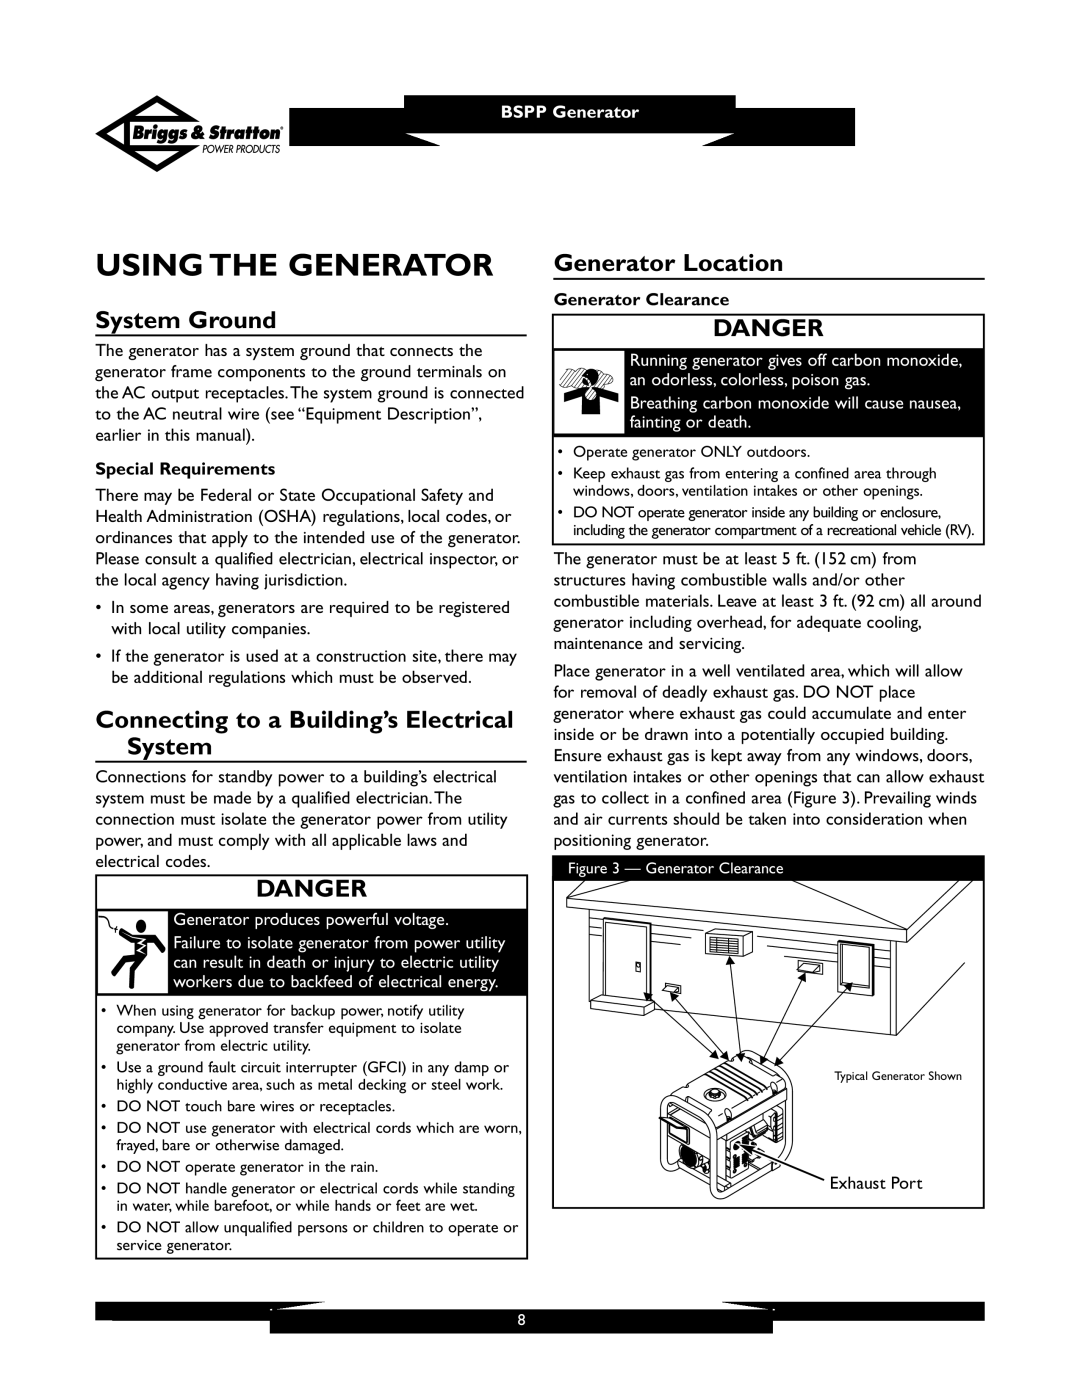 Briggs & Stratton PRO6500 owner manual Using the Generator, System Ground, Connecting to a Building’s Electrical System 